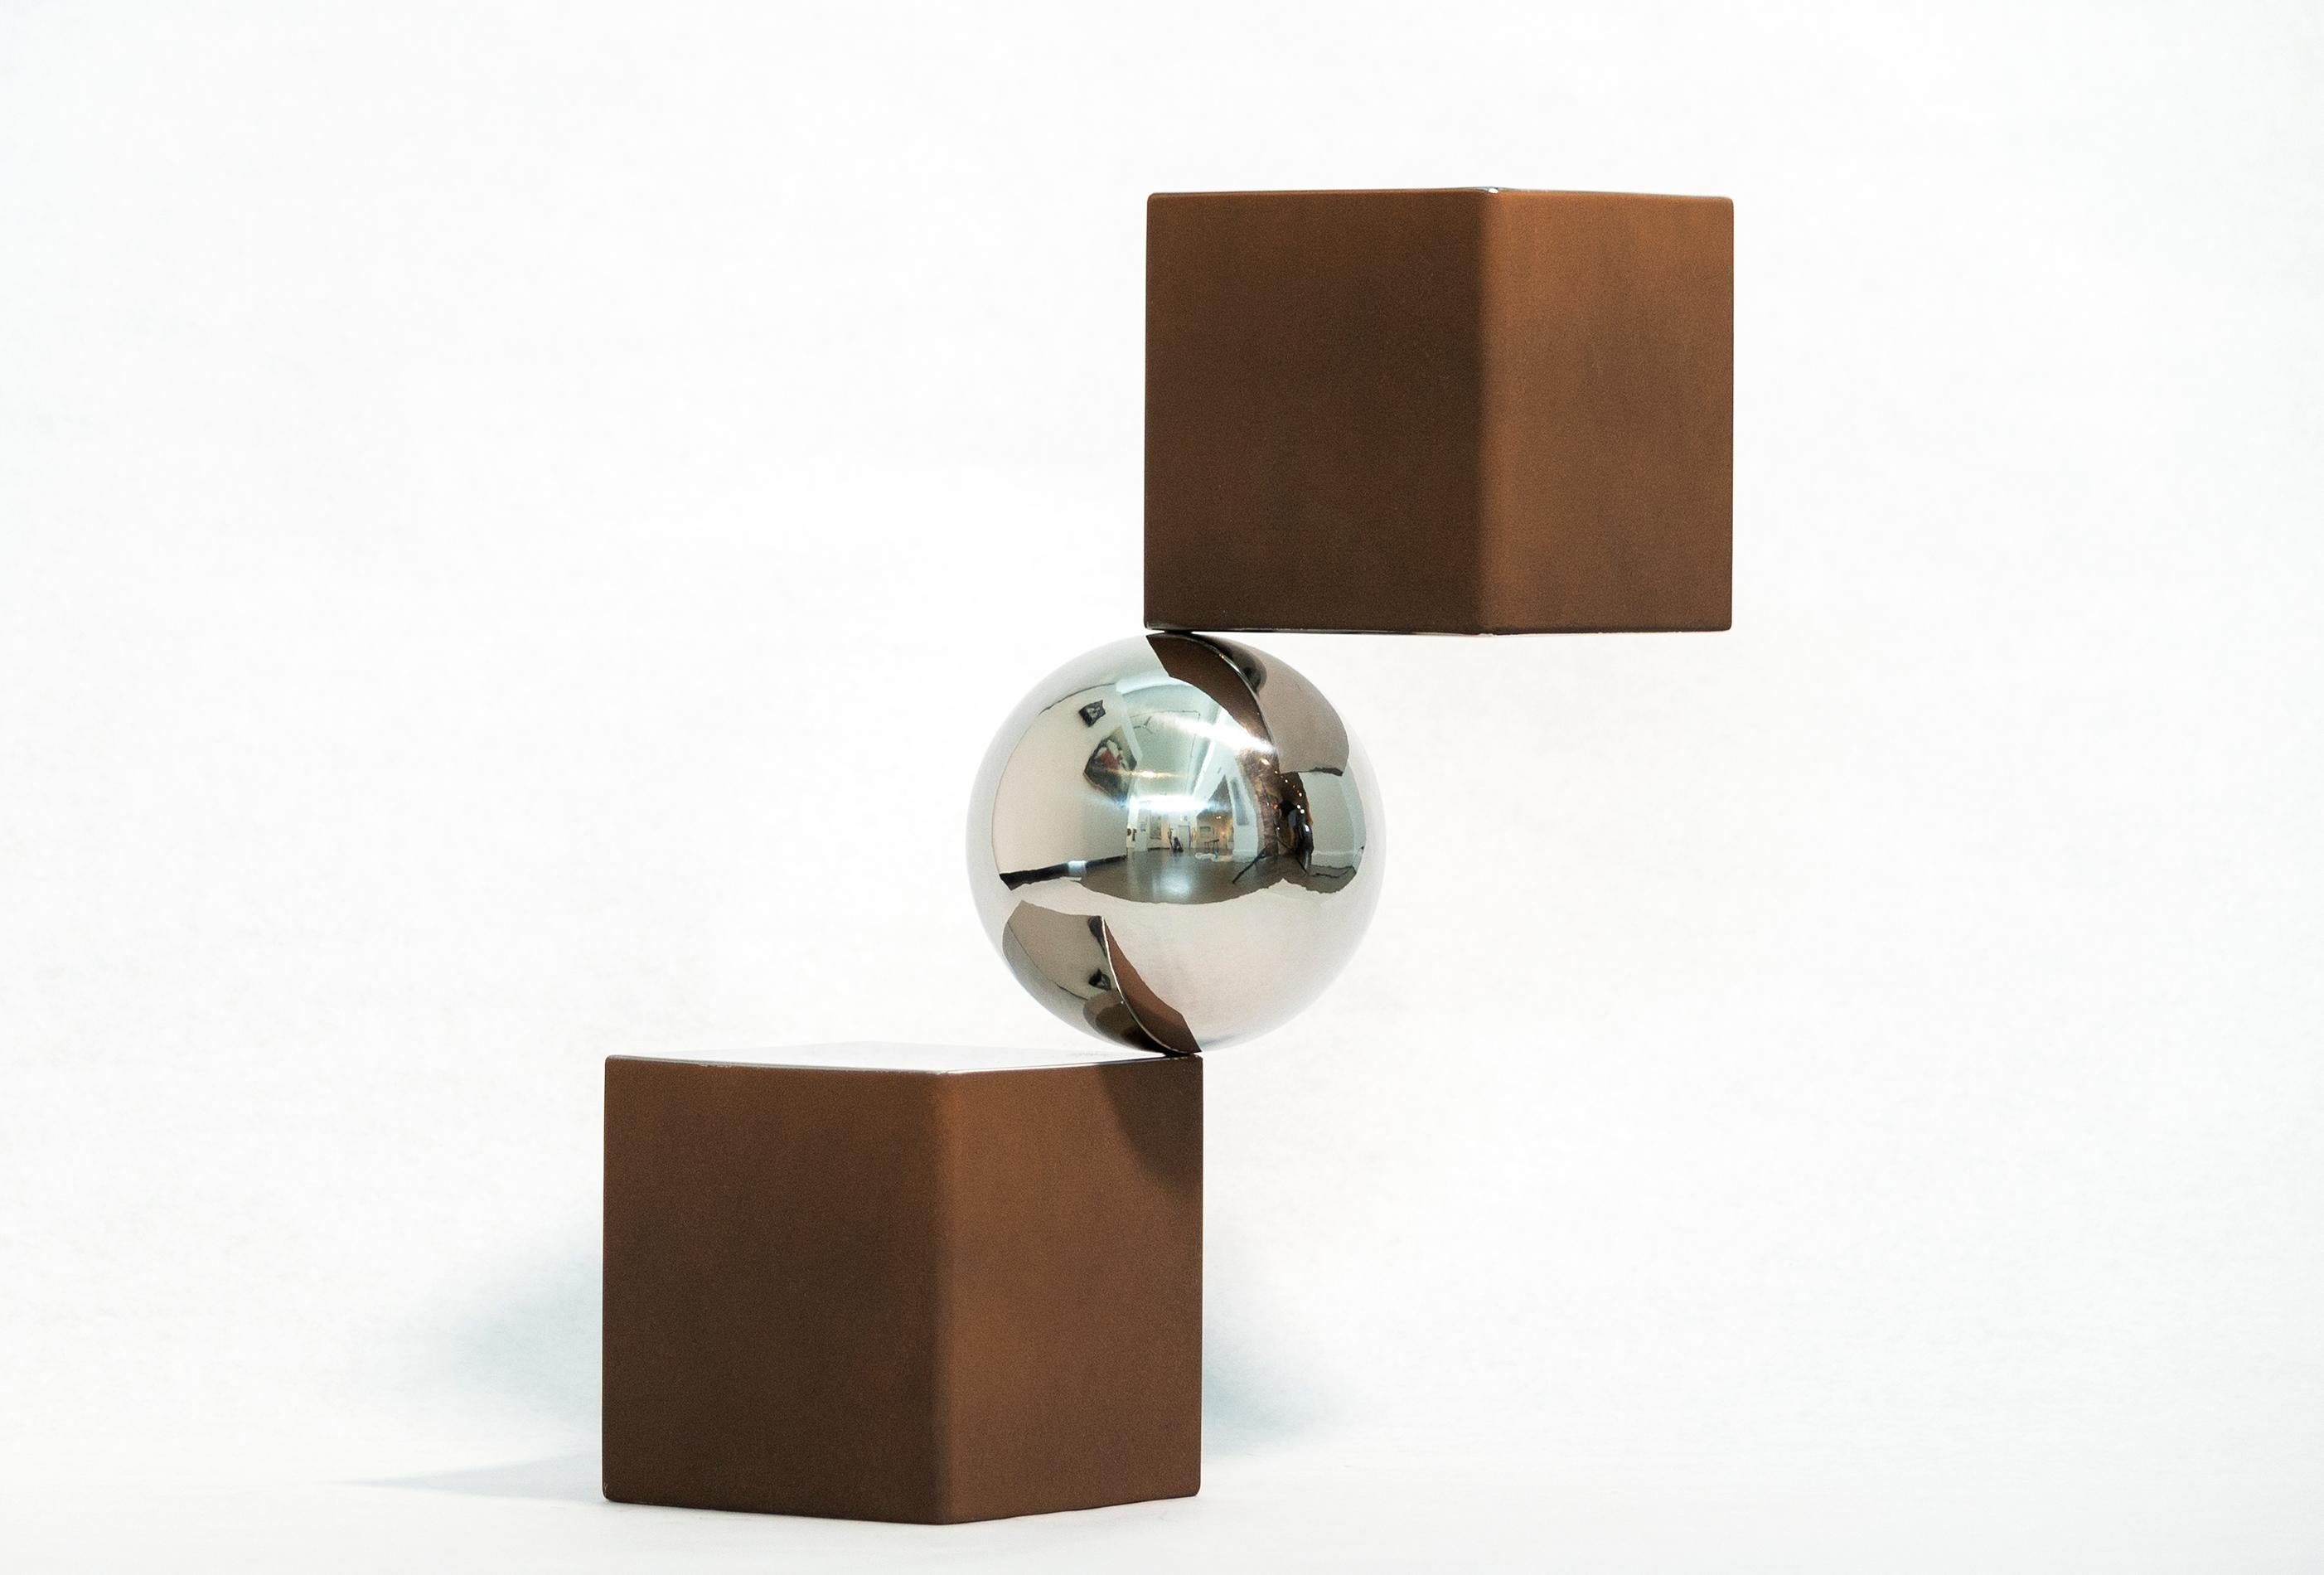 Equilibre 2-Tone 1/10 - geometric abstract, modern, polished. aluminum sculpture - Contemporary Sculpture by Philippe Pallafray